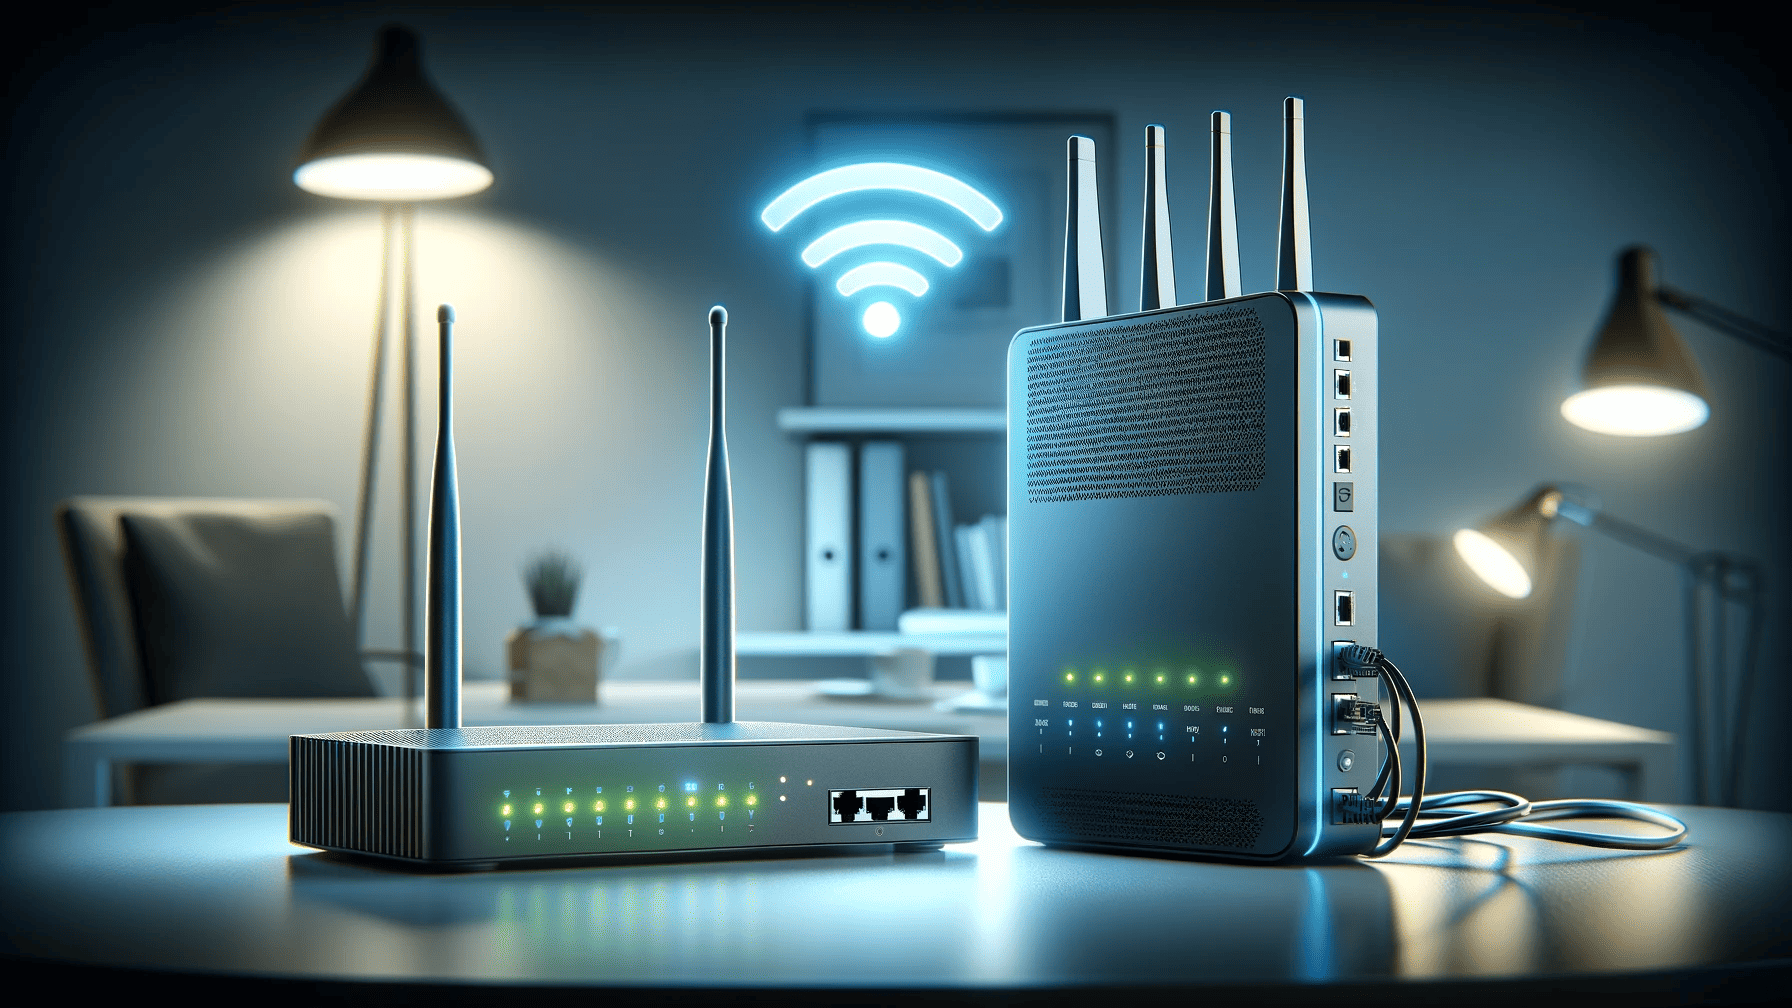 Wireless Access Point vs Wi-Fi Router 